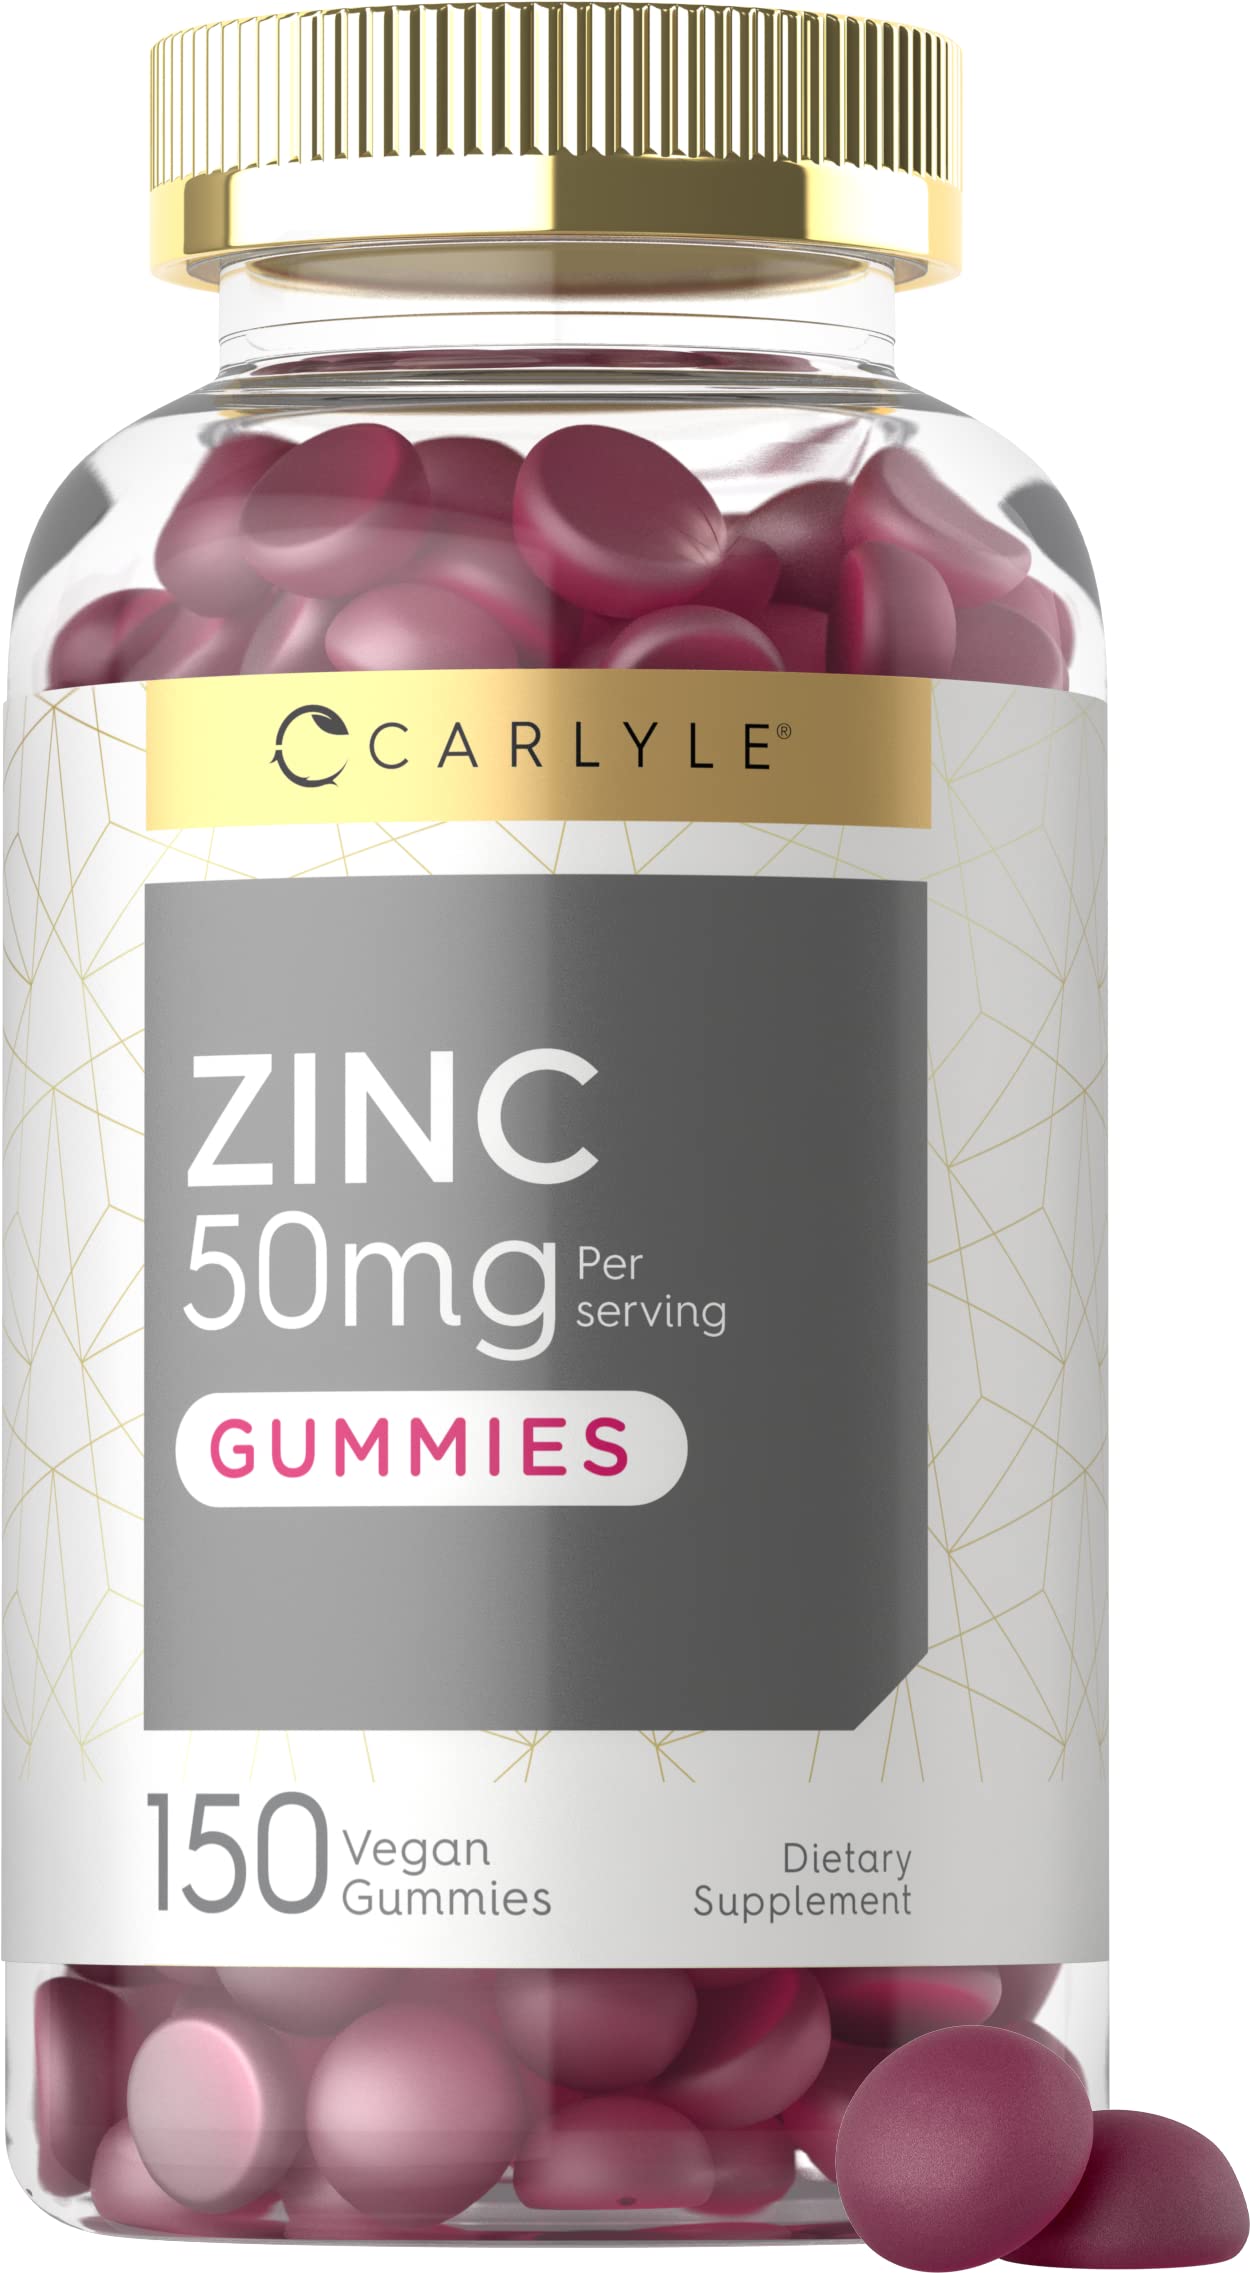 Zinc 50mg Gummies | 150 Count | Vegan, Non-GMO and Gluten Free Formula | Zinc Citrate Dietary Supplement | by Carlyle